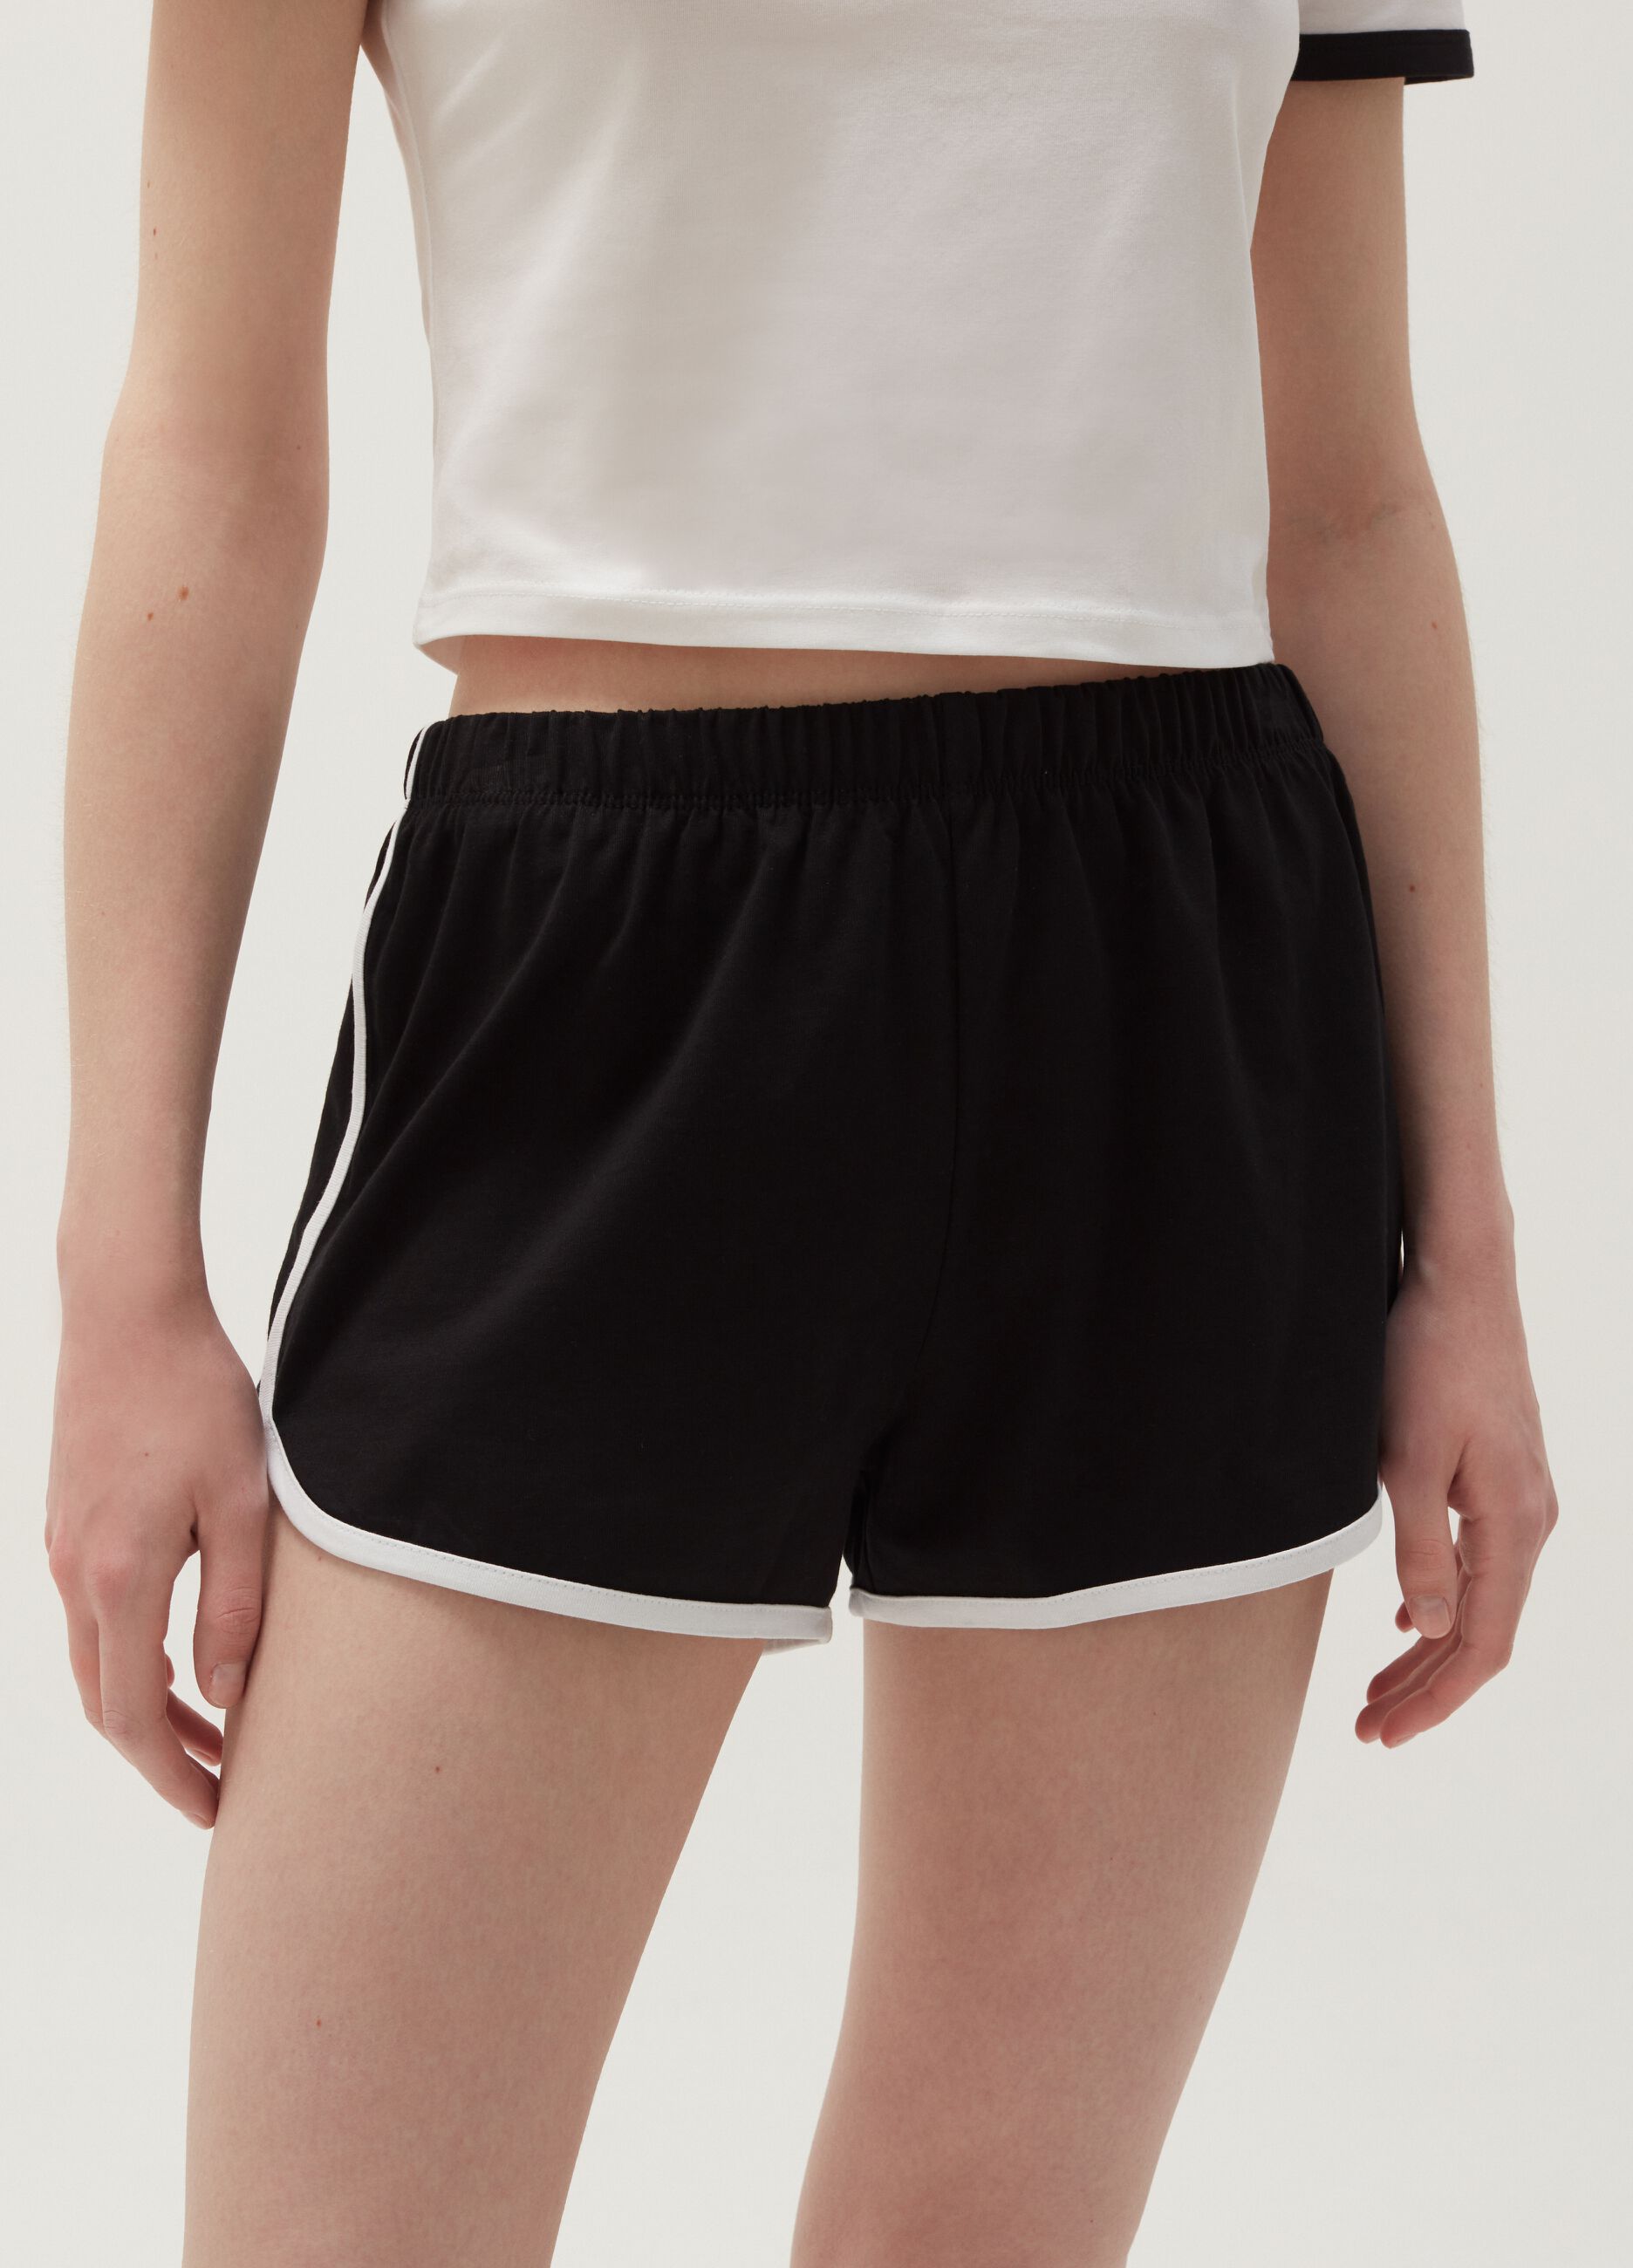 Baby Angel cotton shorts with contrasting trims.